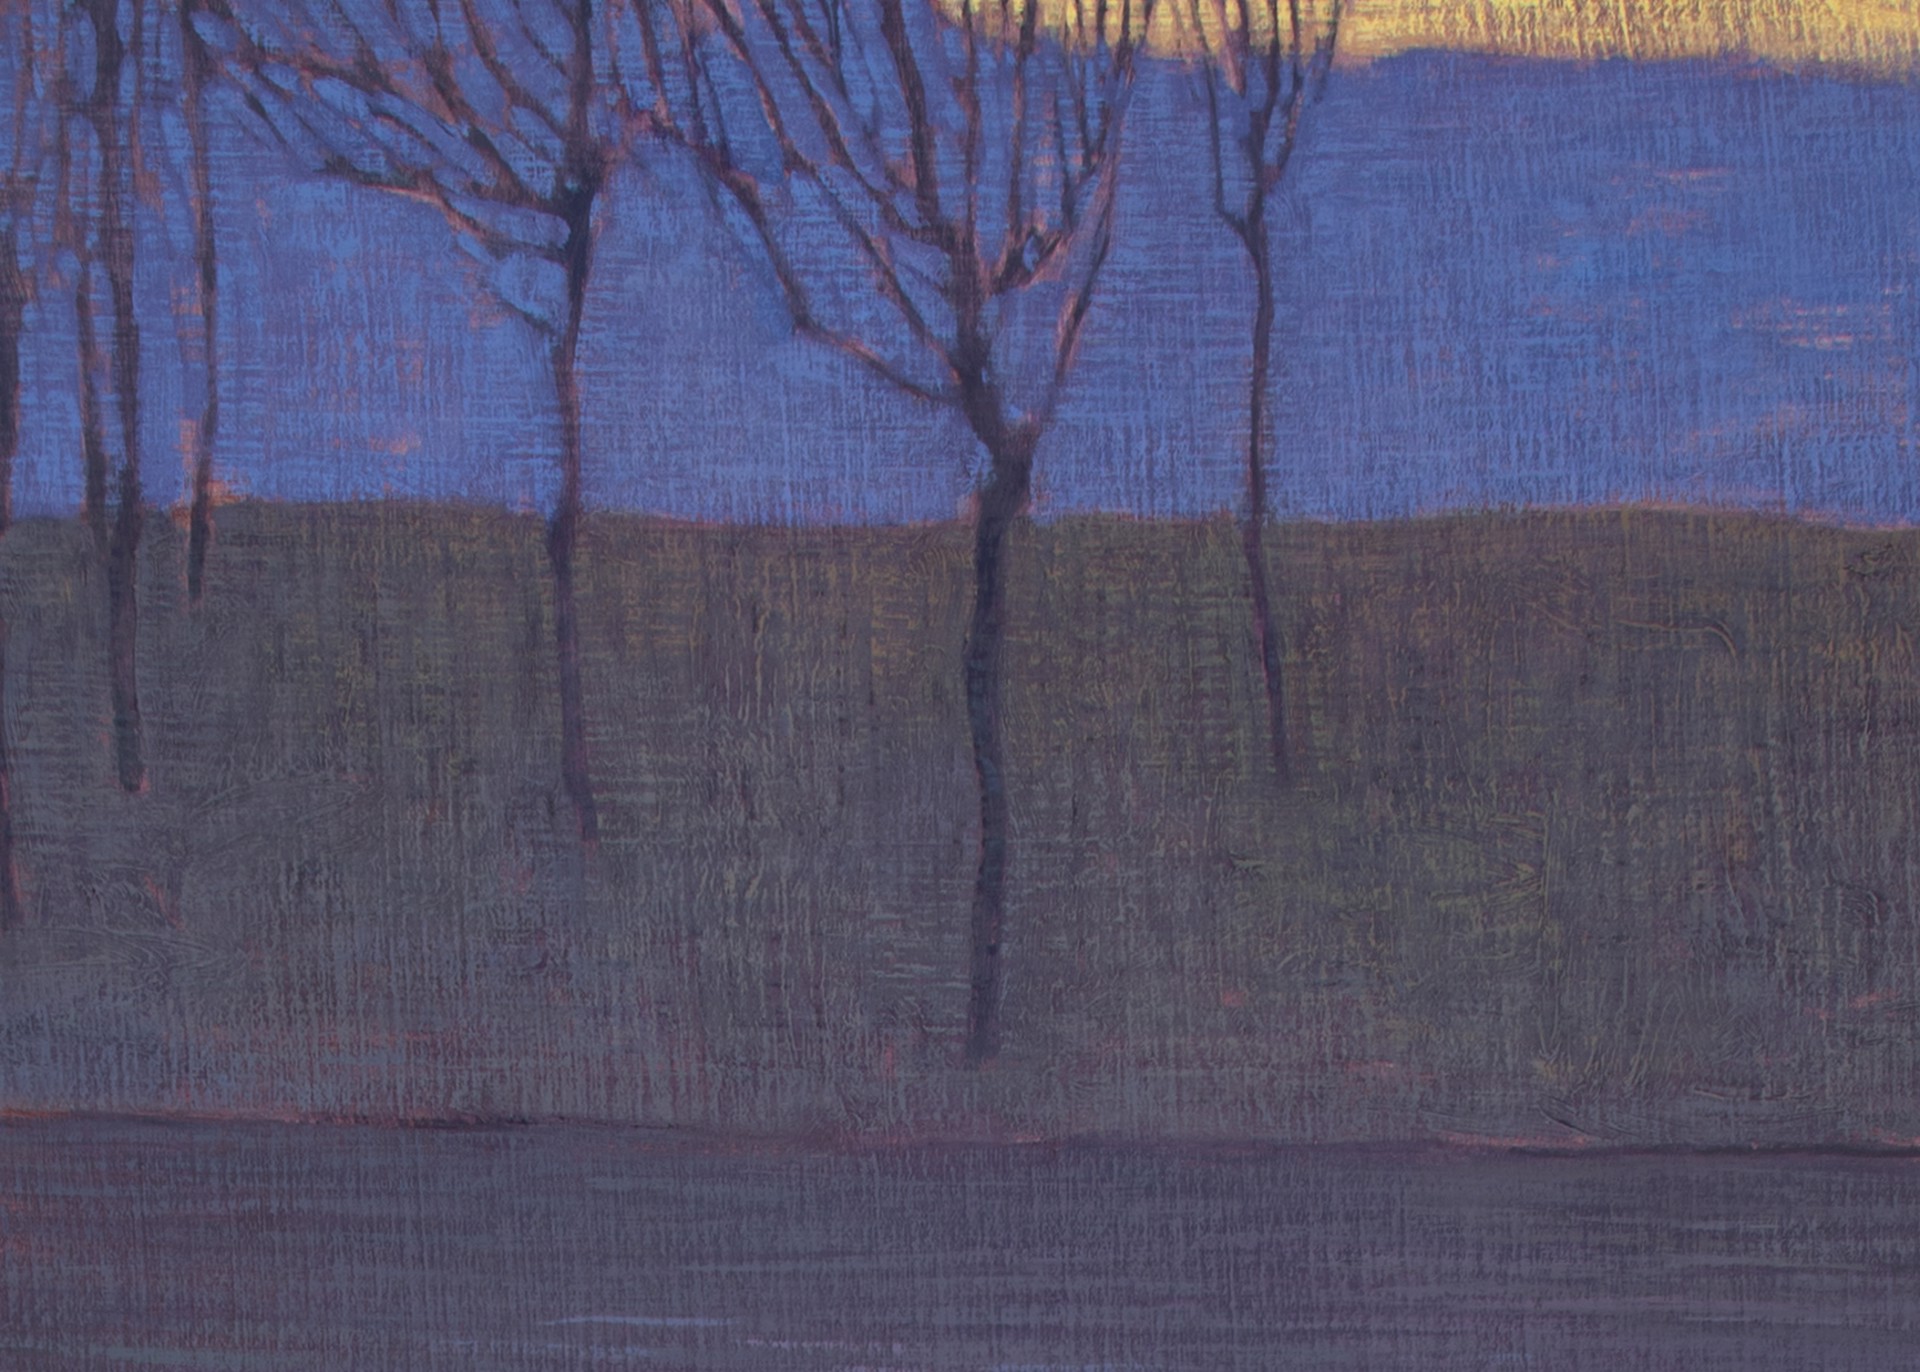 End of Day Water Colors by David Grossmann